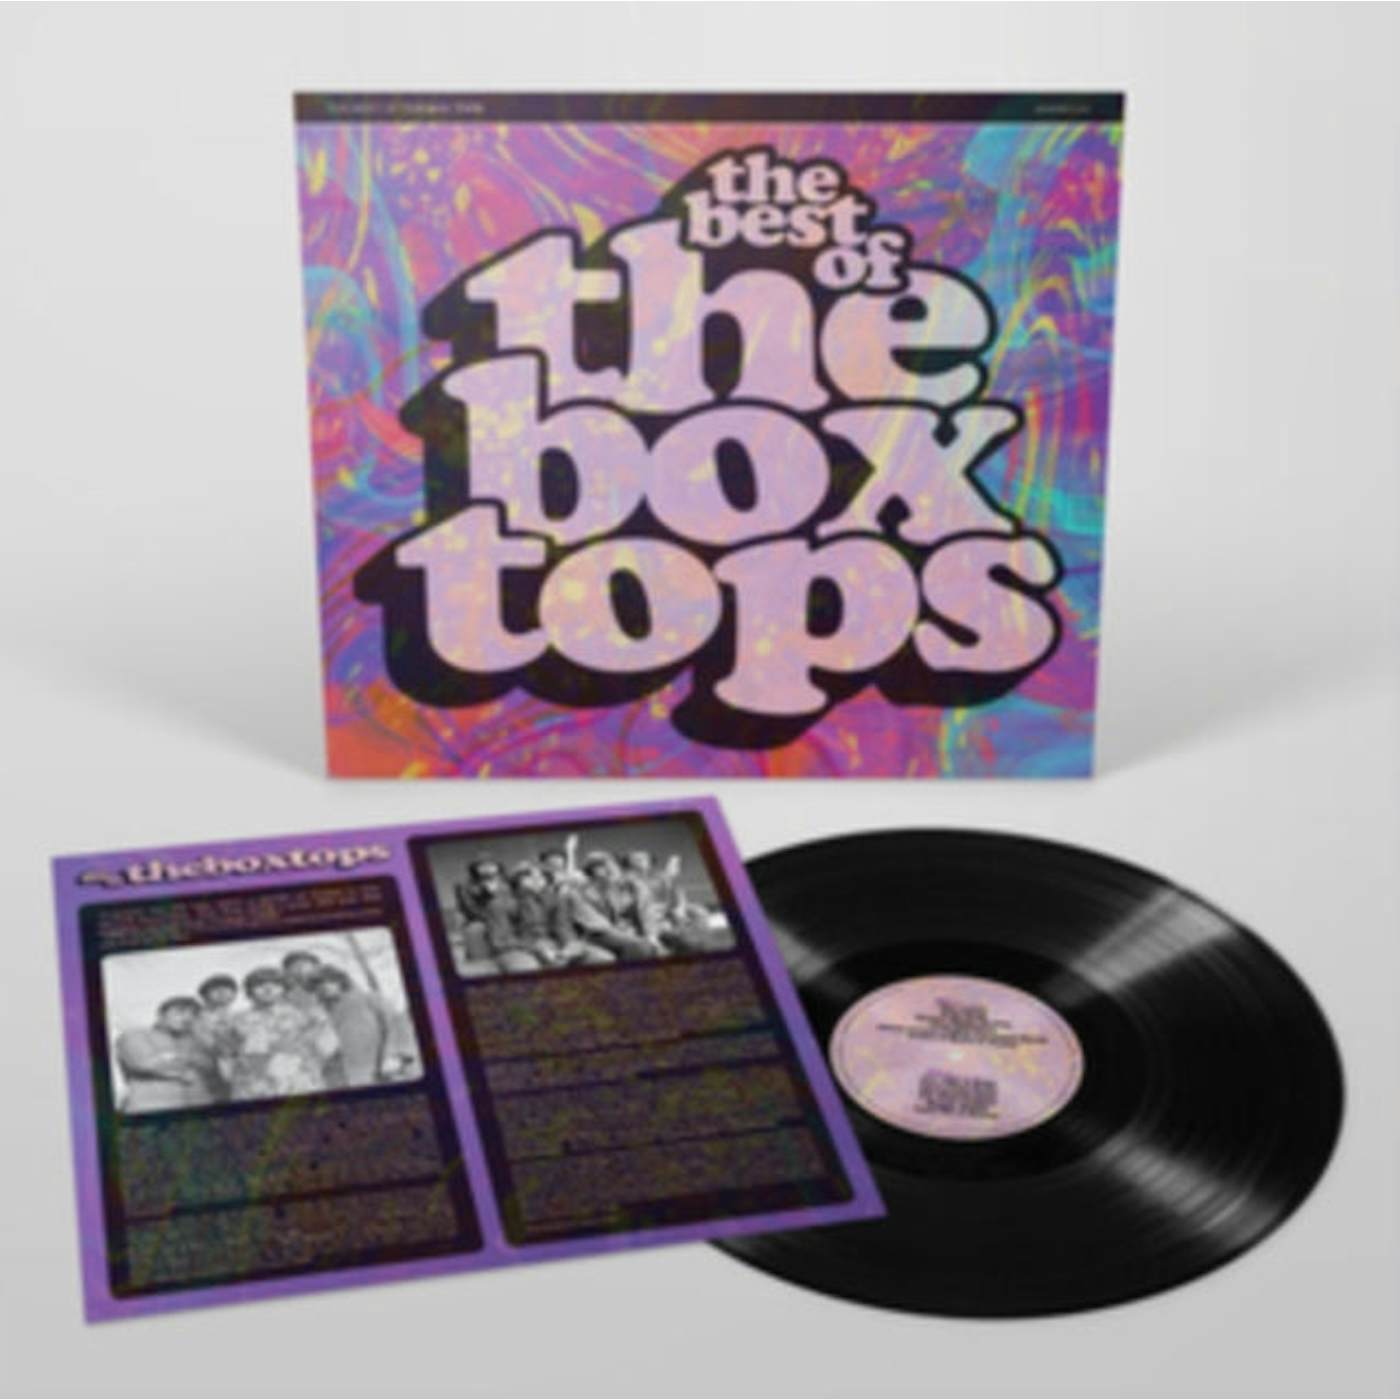 The Box Tops LP Vinyl Record  The Best Of